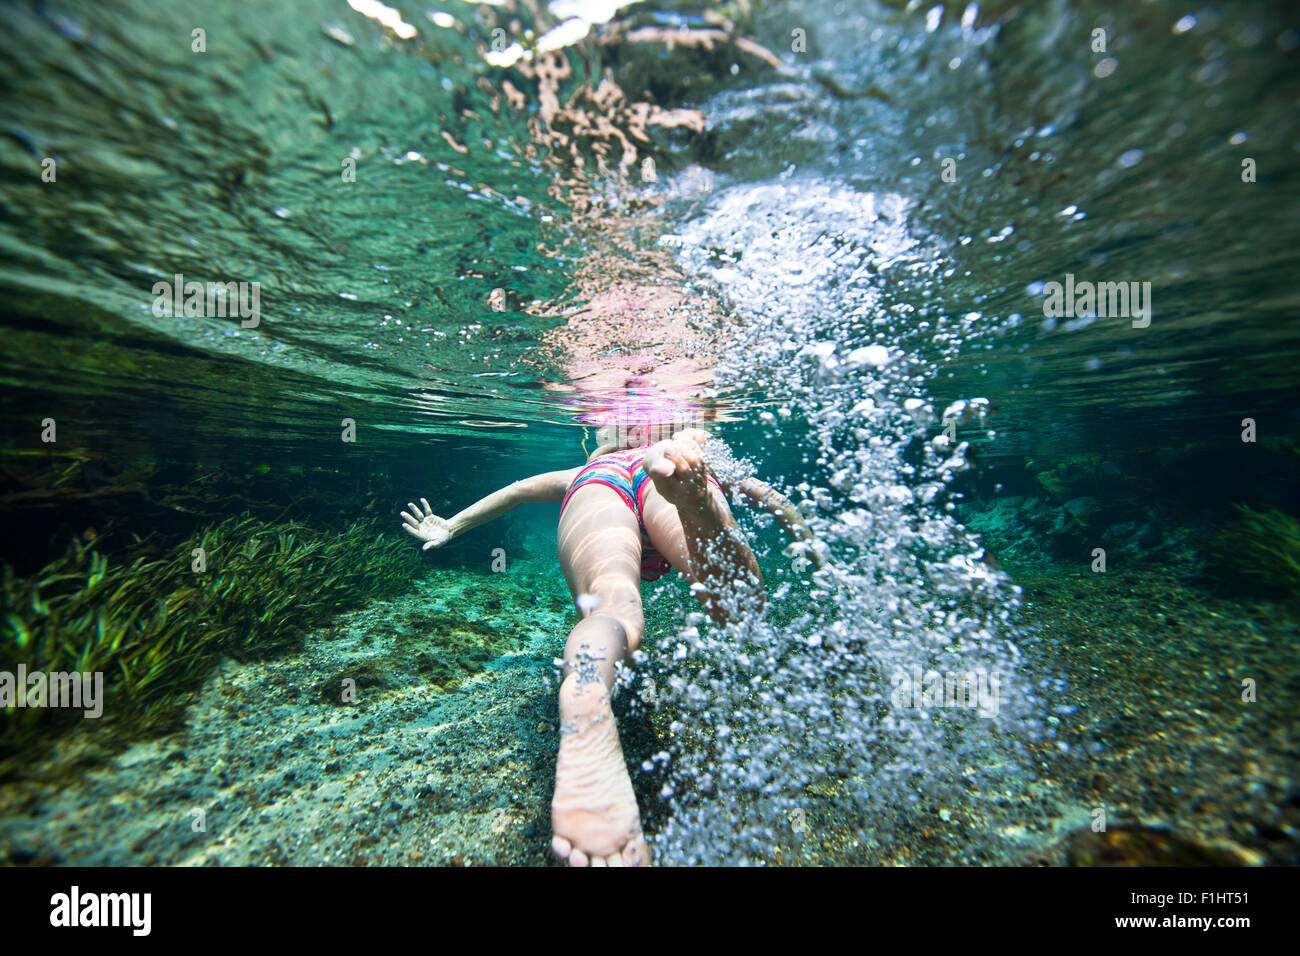 Underwater Photo following a female swimmer through Rock Springs Run in Kelly Park in Central Florida Stock Photo